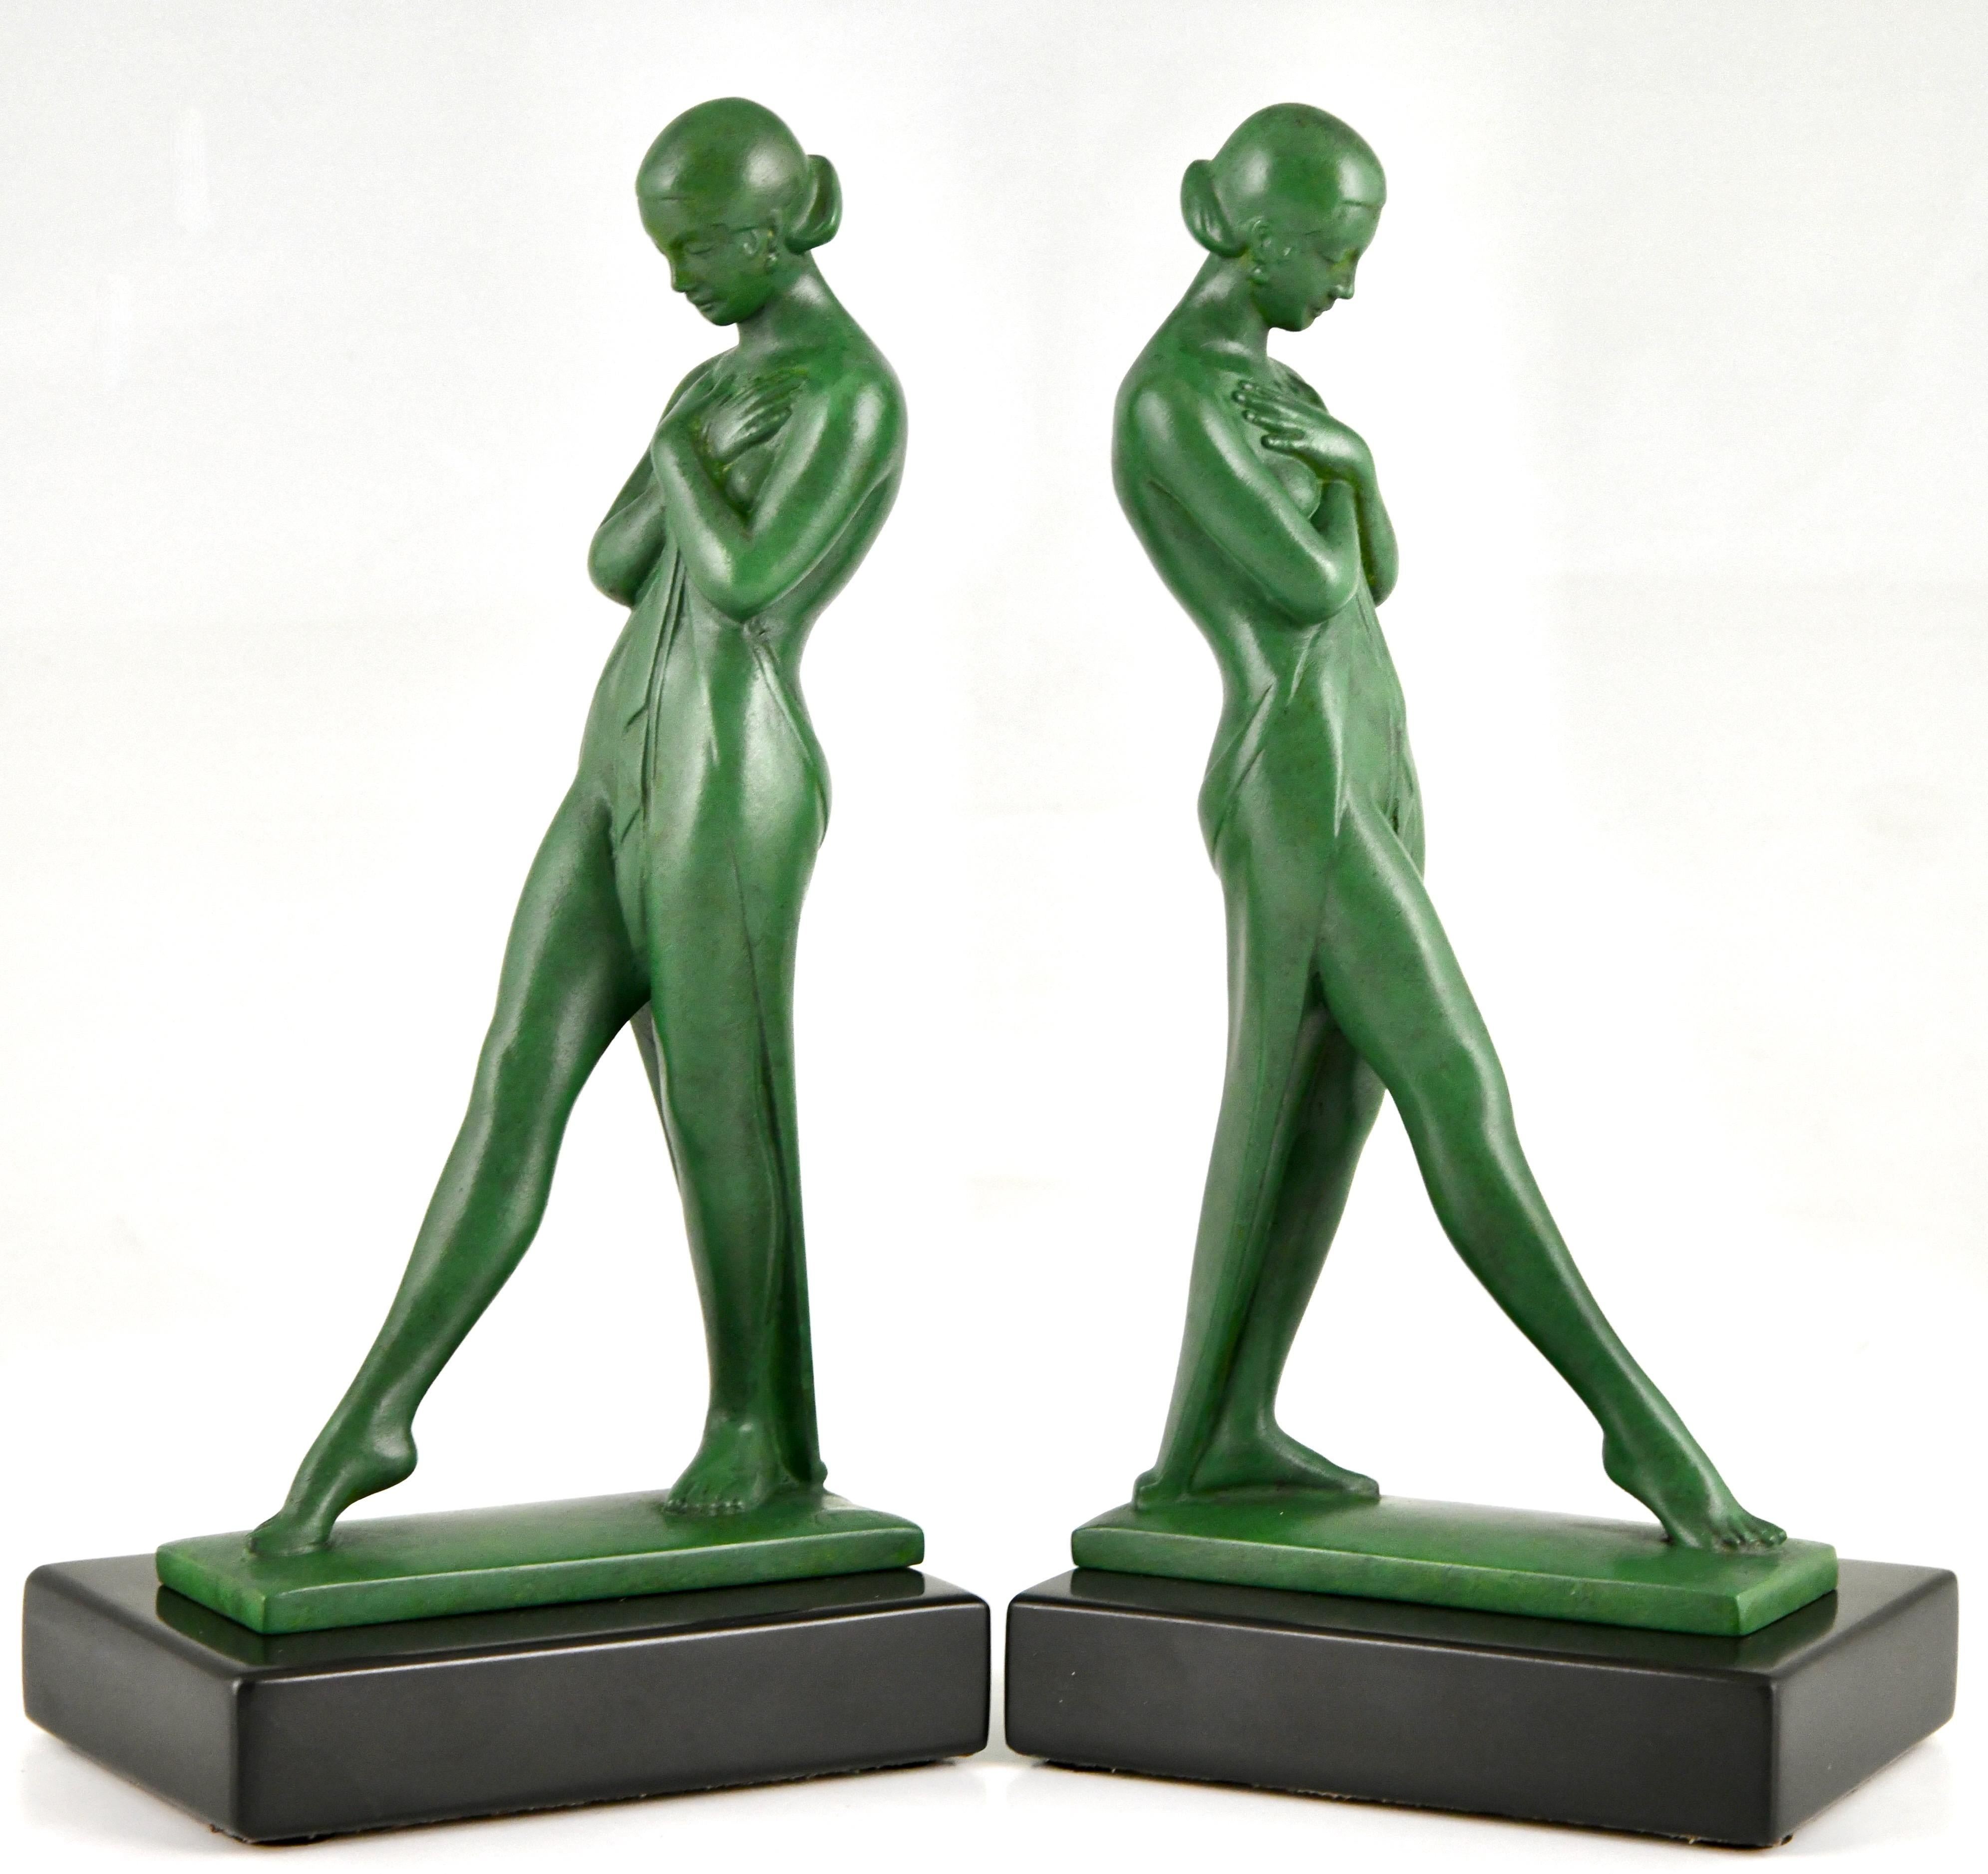 Art Deco bookends with standing nudes Meditation
Signed by Fayral, pseudonym of Pierre Le Faguays. 
Cast at the Max Le Verrier foundry, France ca. 1930
Art Metal with green patina on Belgian Black marble base. 

Literature:
Bronzes, sculptors and